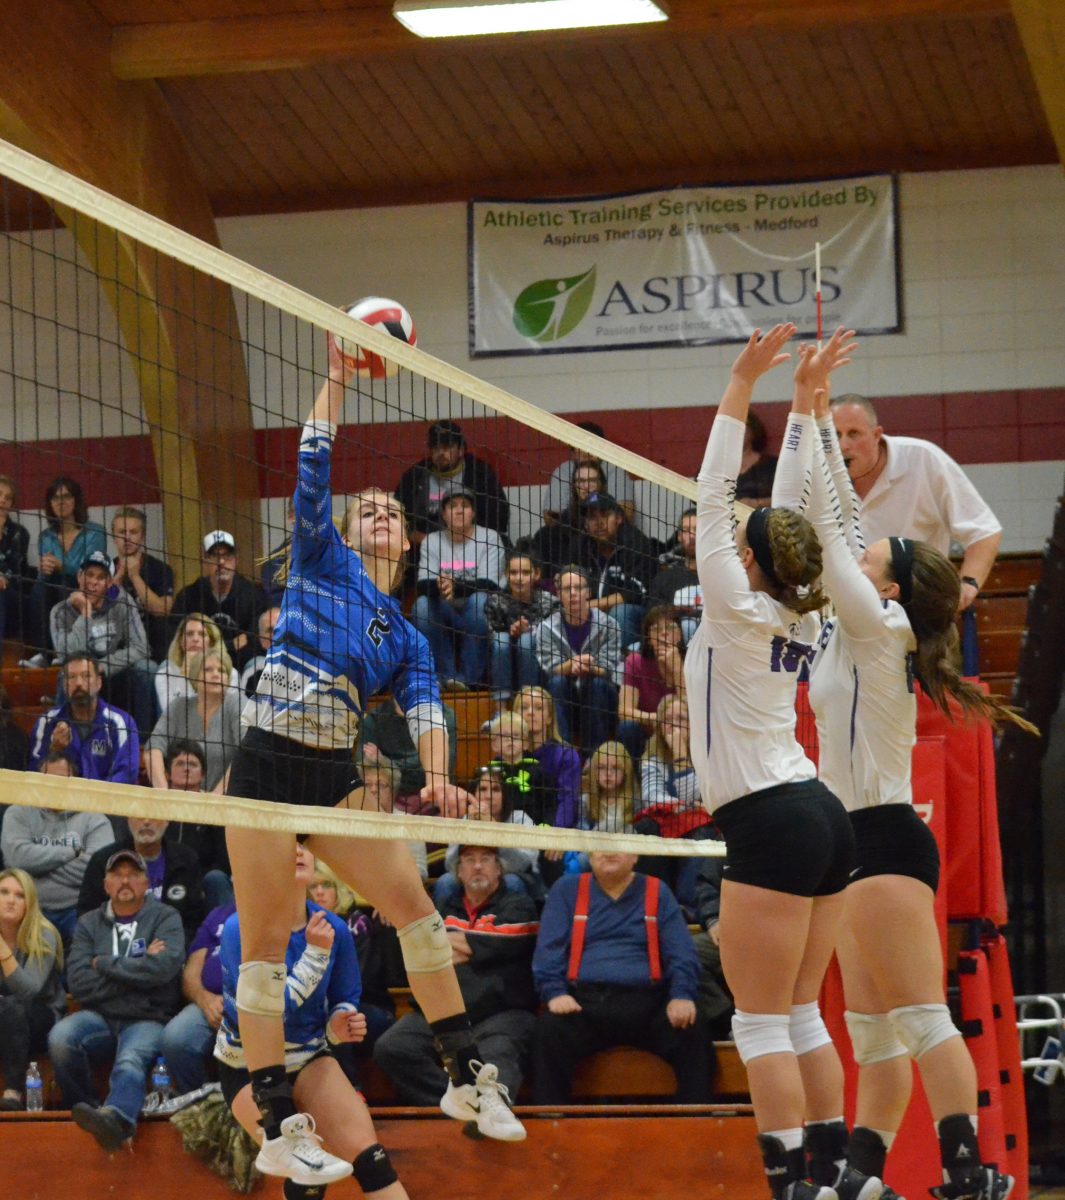 Bluejay spikers advance to sectional finals